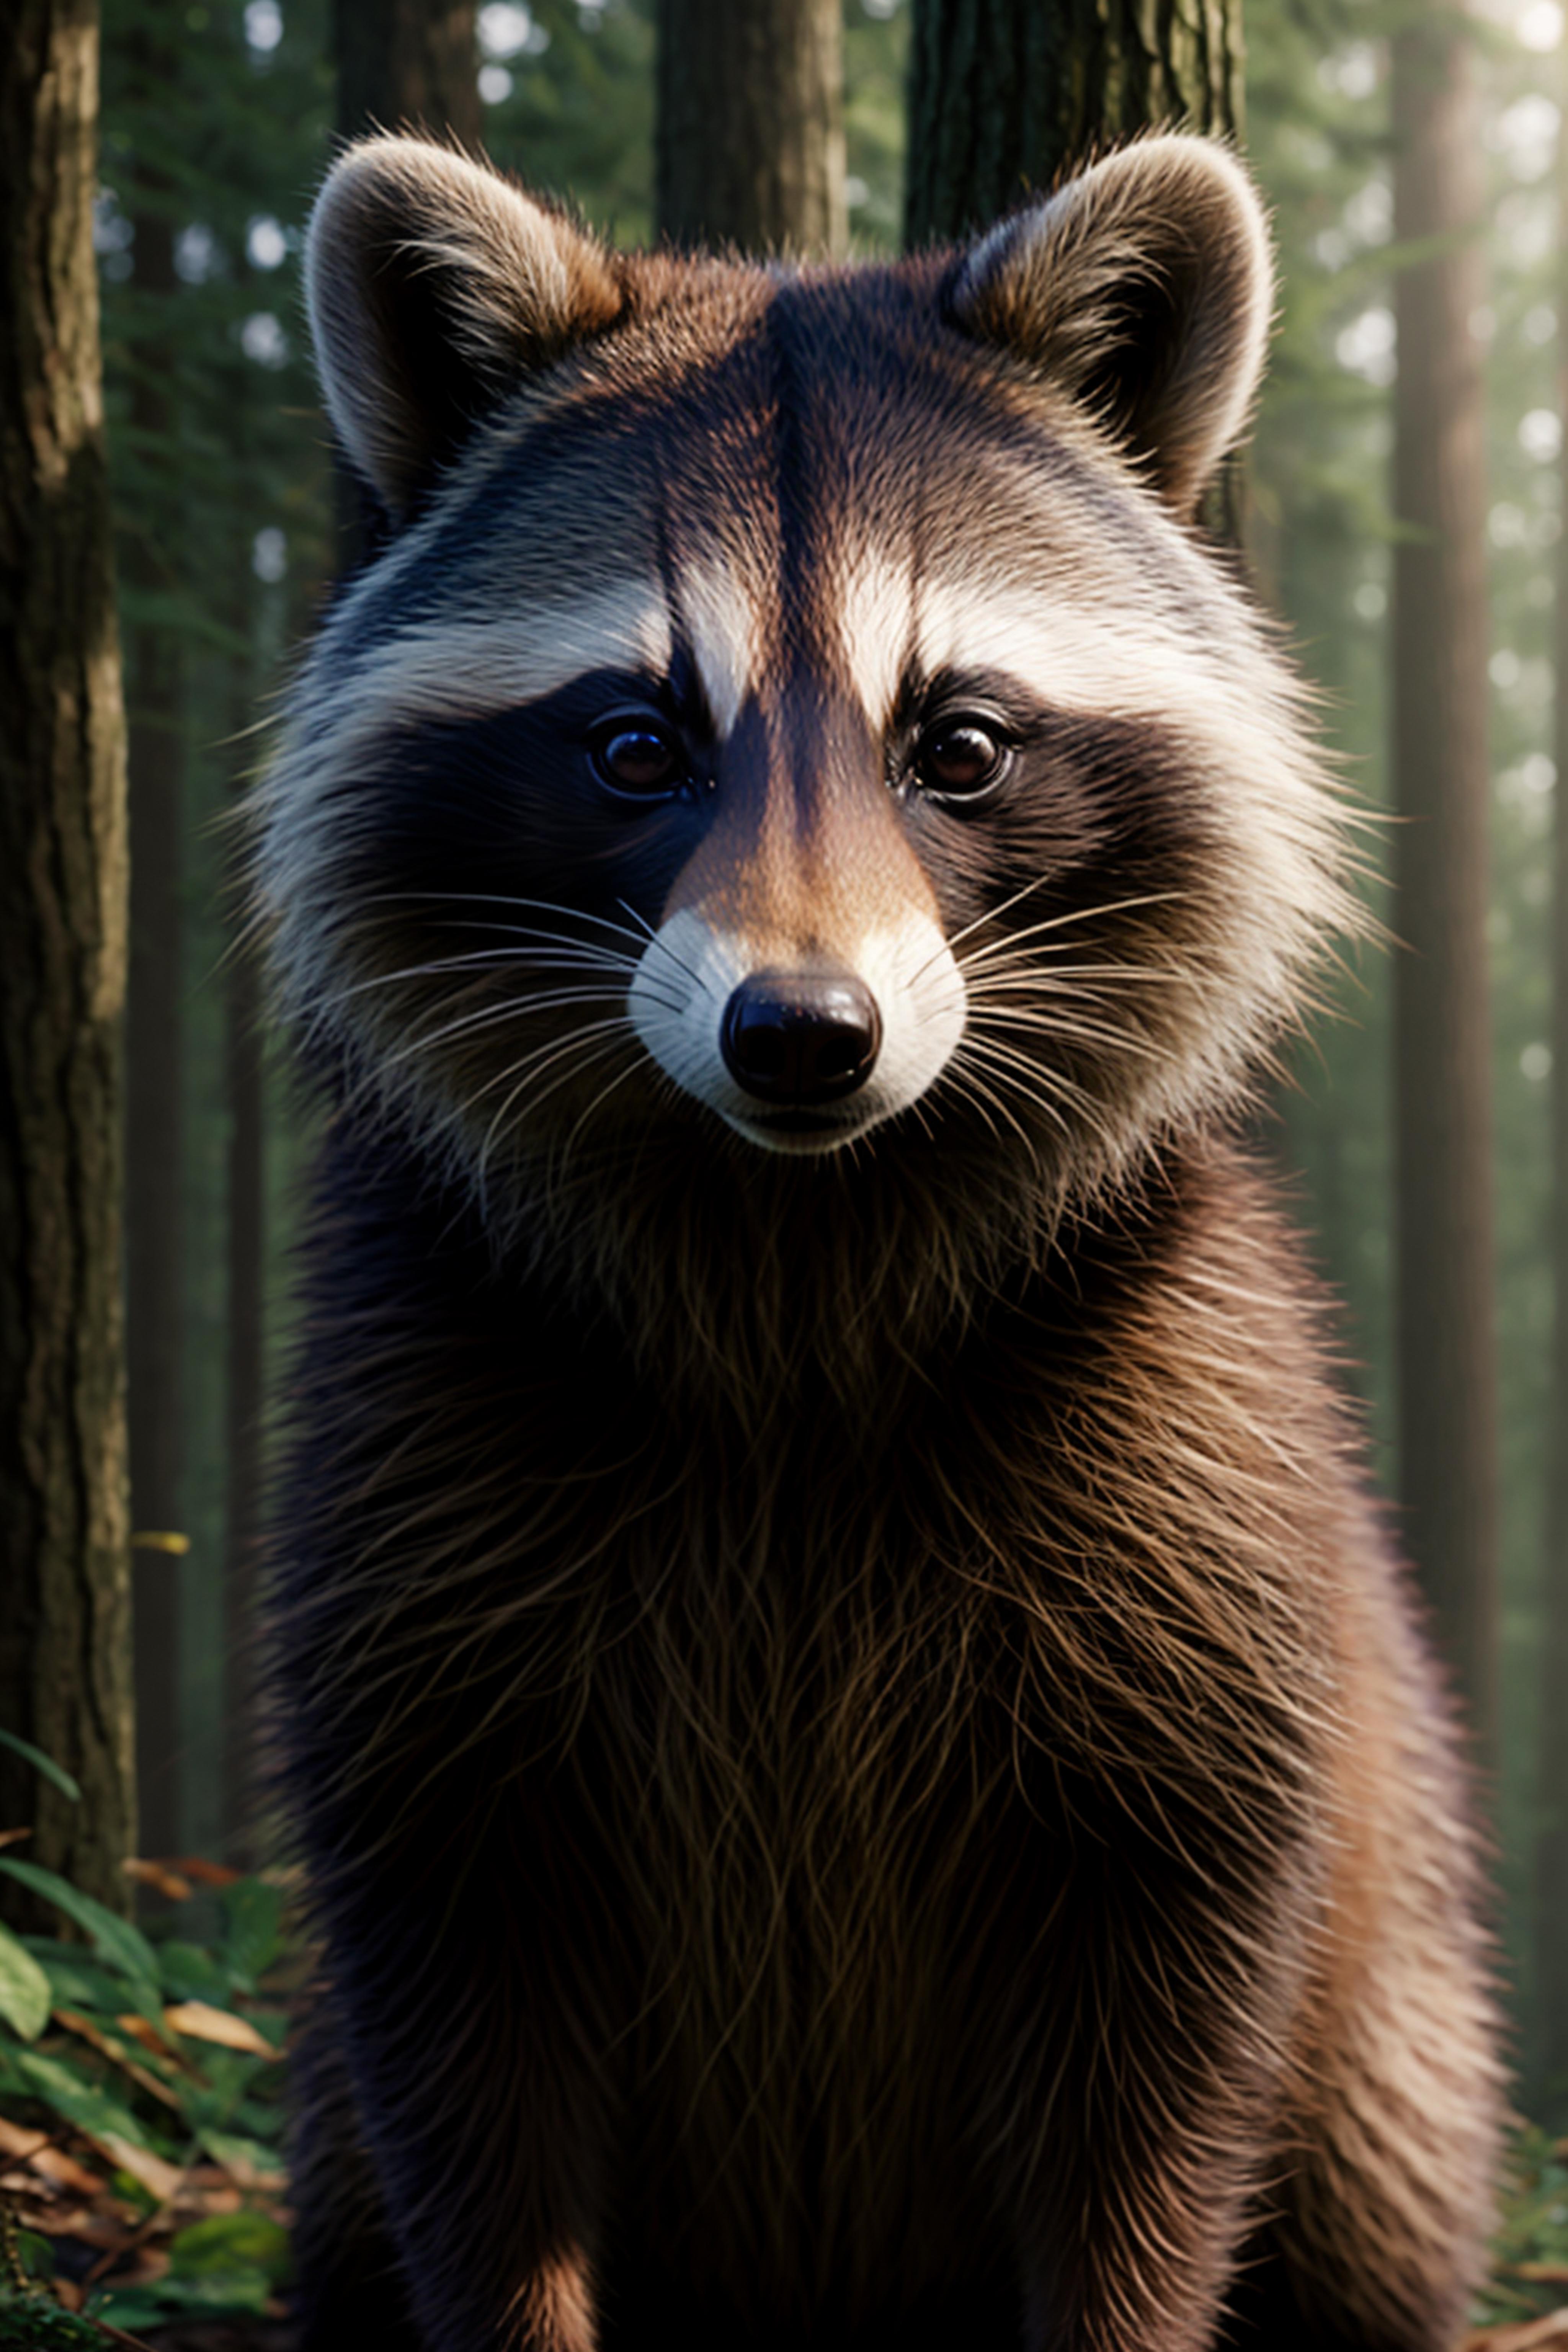 A close-up of a raccoon's face in a forest setting.